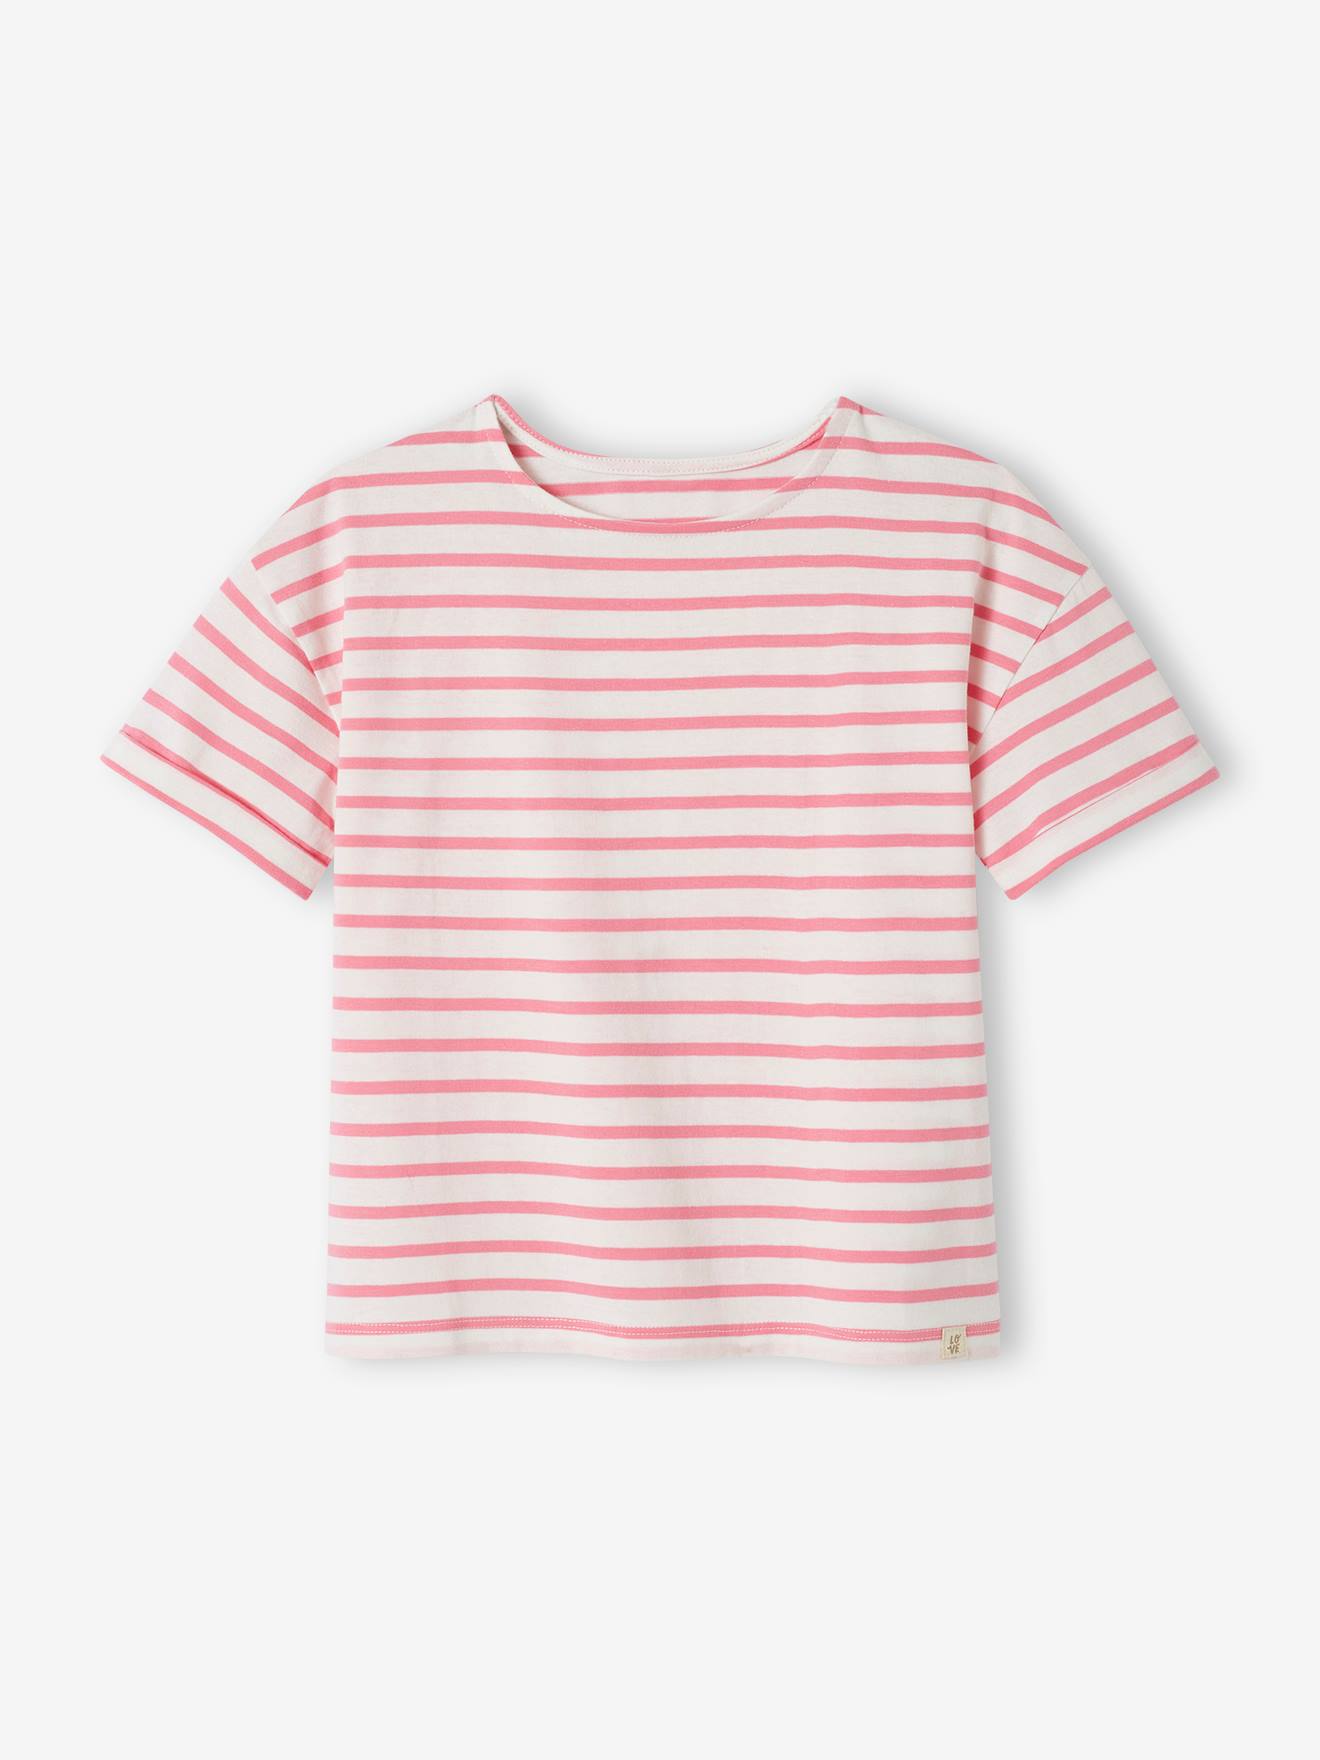 Sailor-Type T-Shirt for Girls striped pink